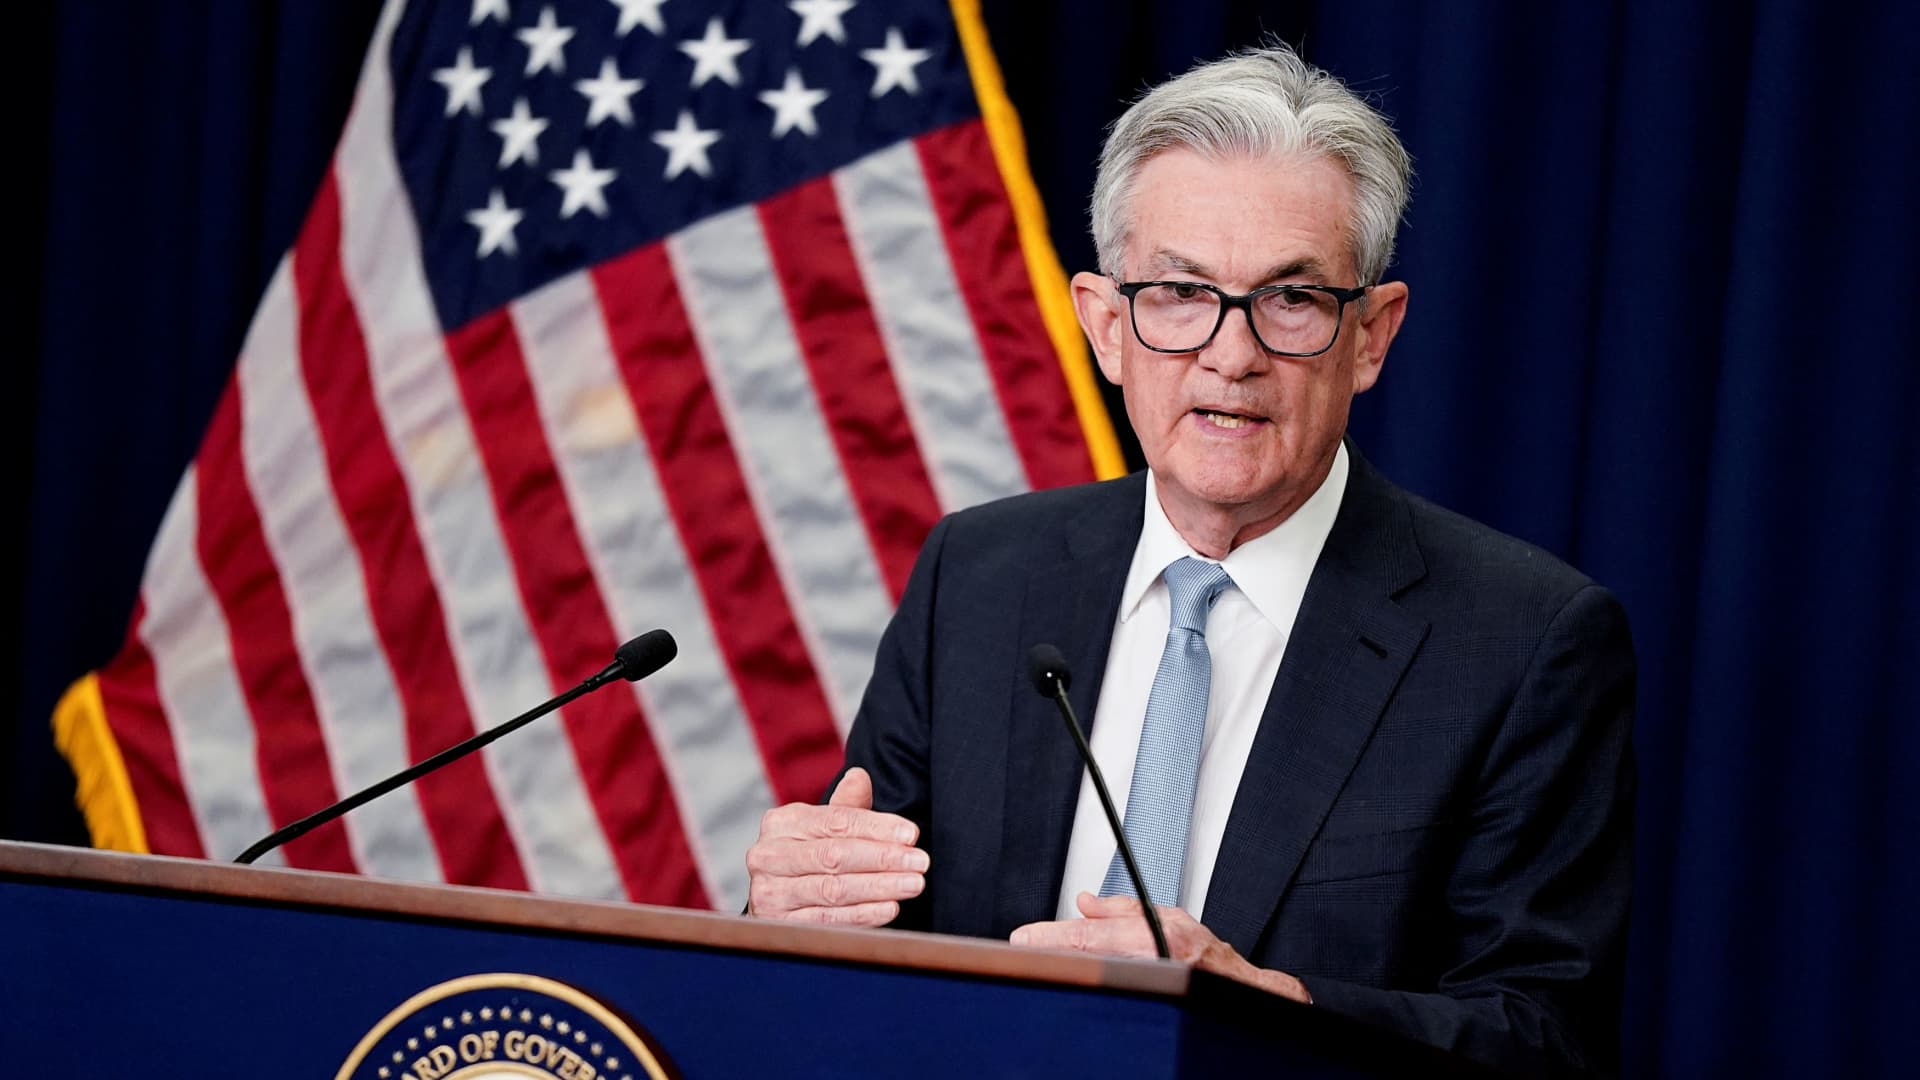 Powell tells Congress the Fed is ‘strongly committed’ to bringing down inflation